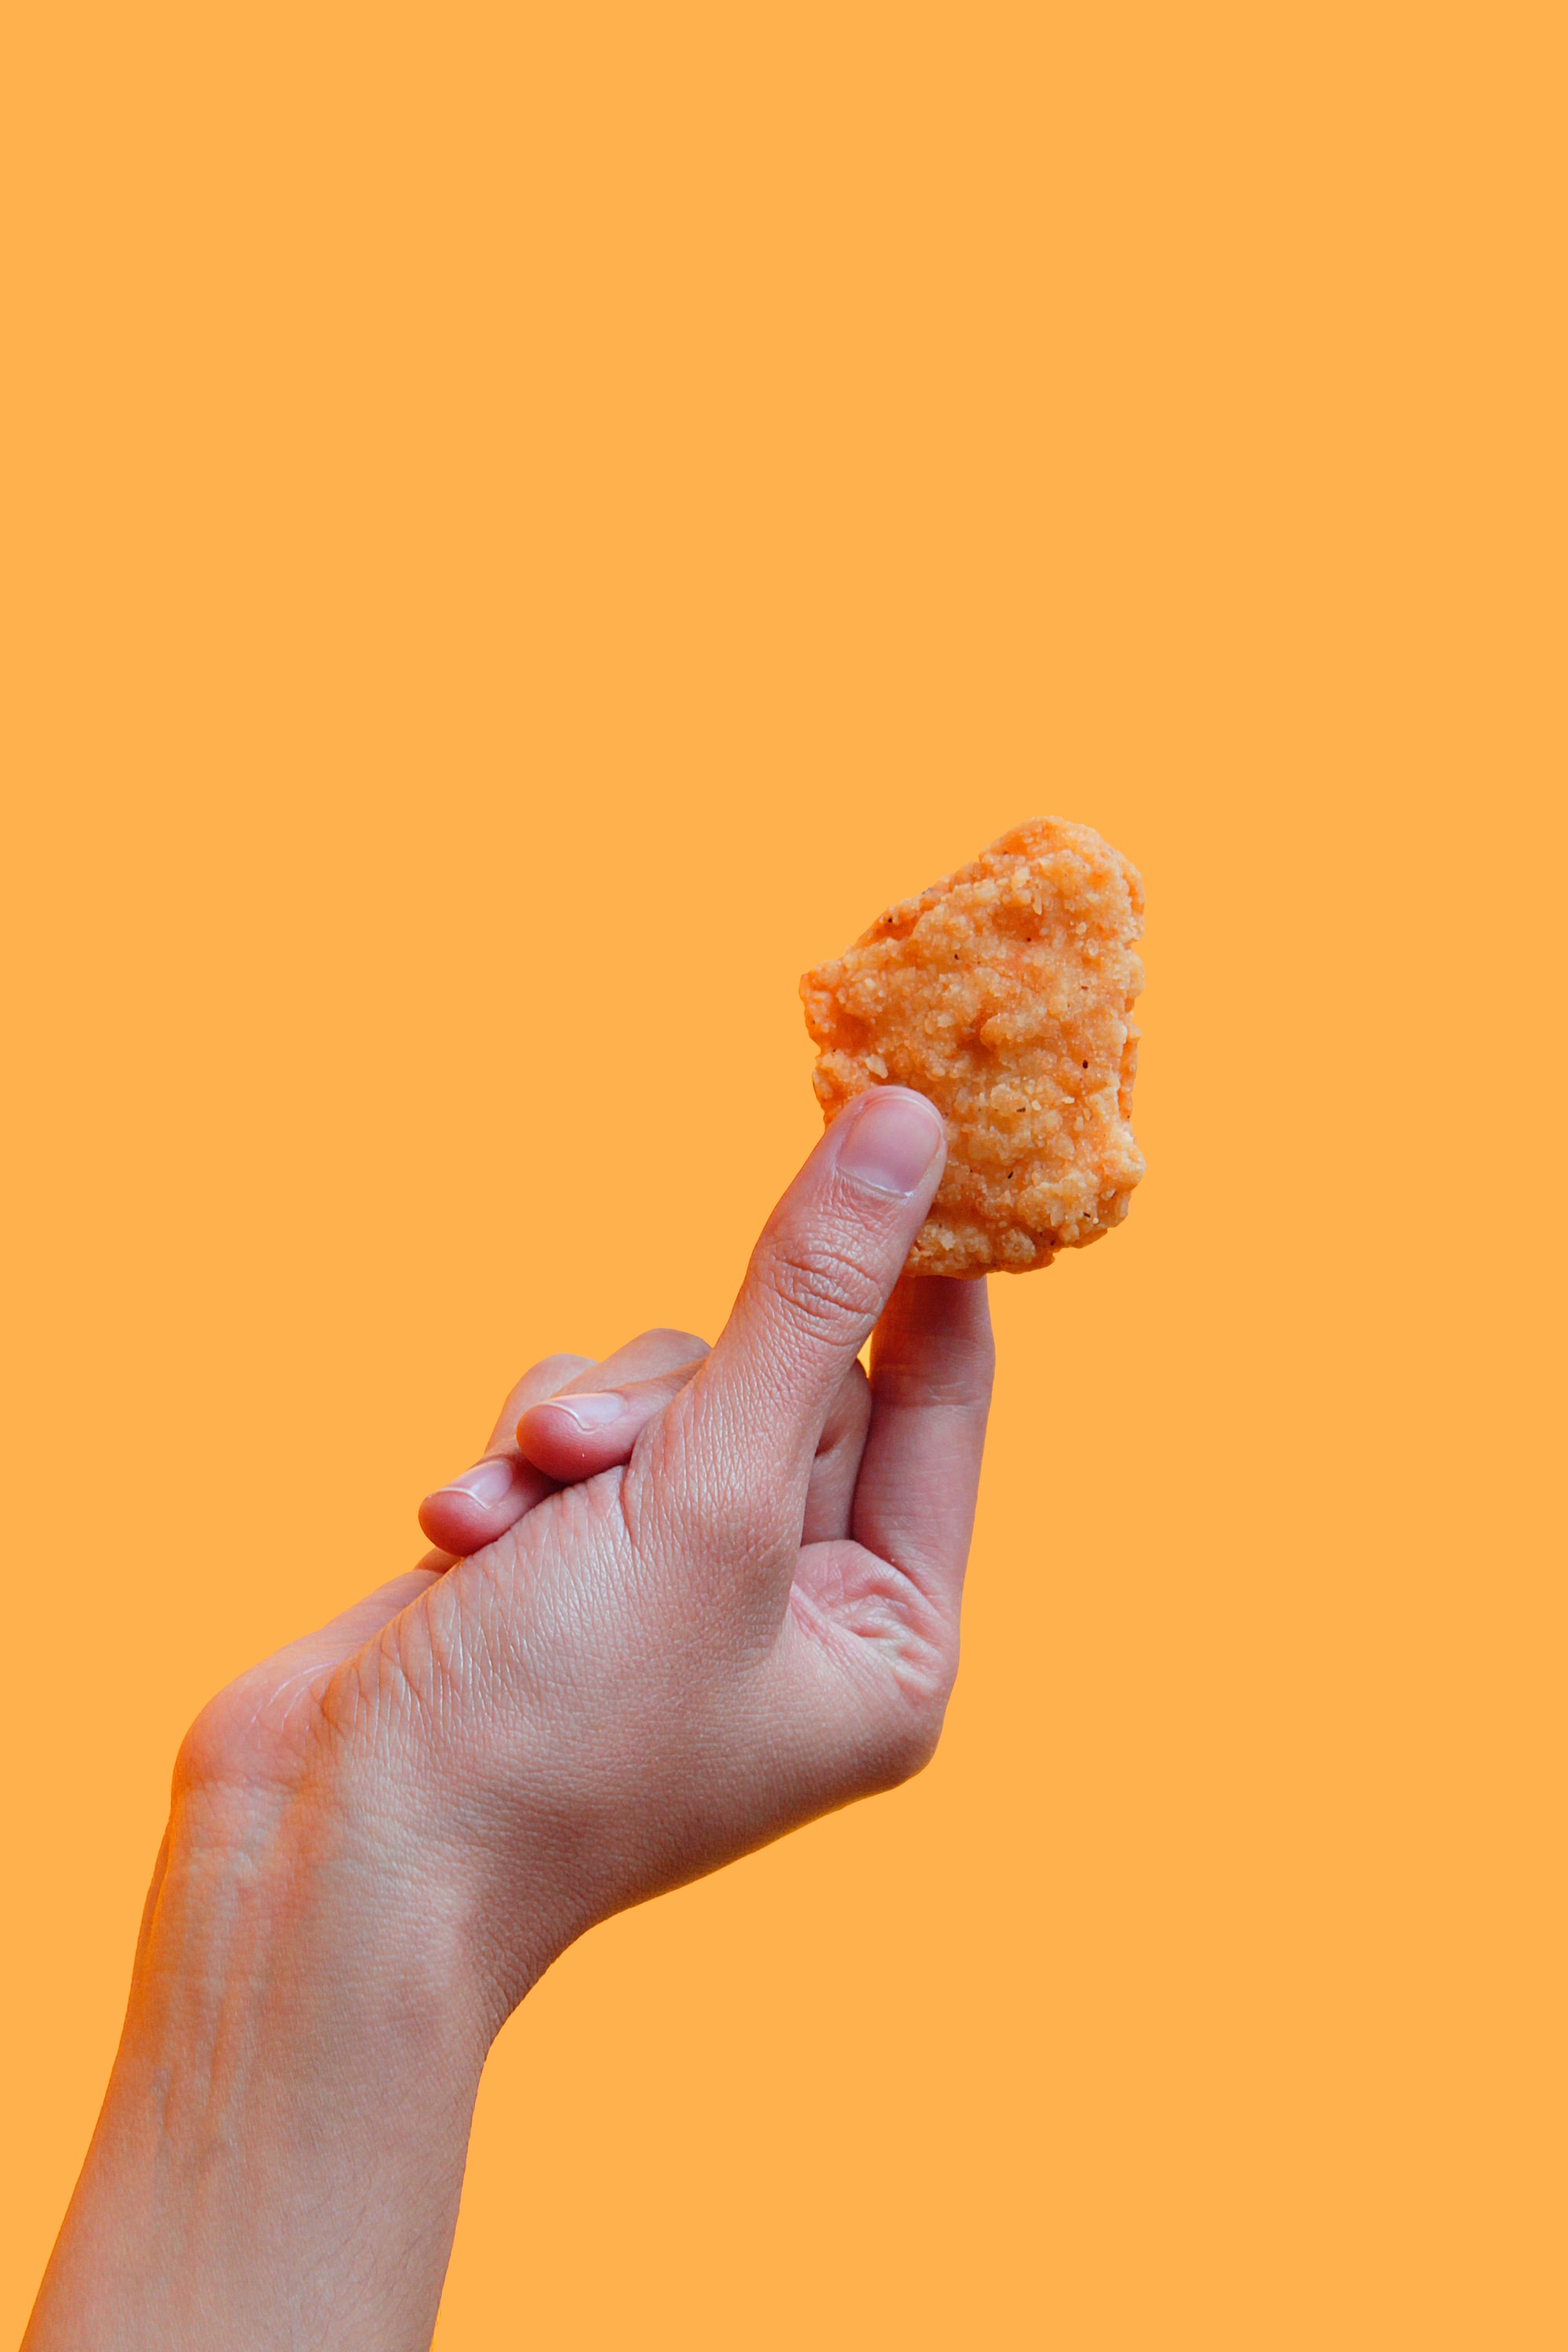 Nuggets to Help in Troubled Times